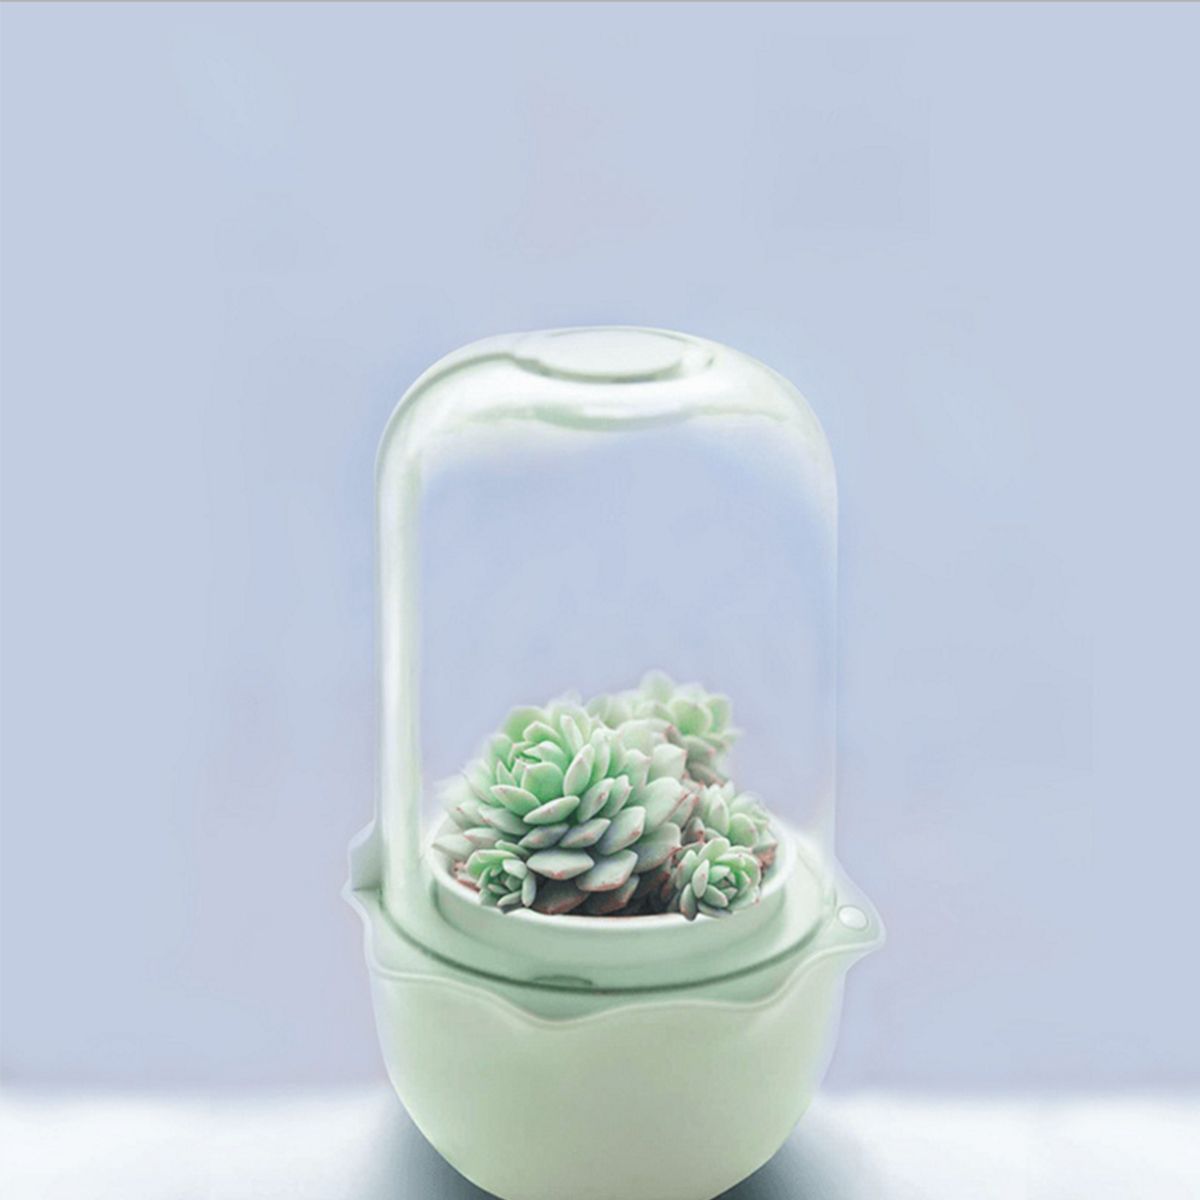 USB-WiFi-Intelligent-Glass-Succulent-Plant-Container-Flower-Pot-Ecological-Bottle-LED-Light-Water-Re-1448484